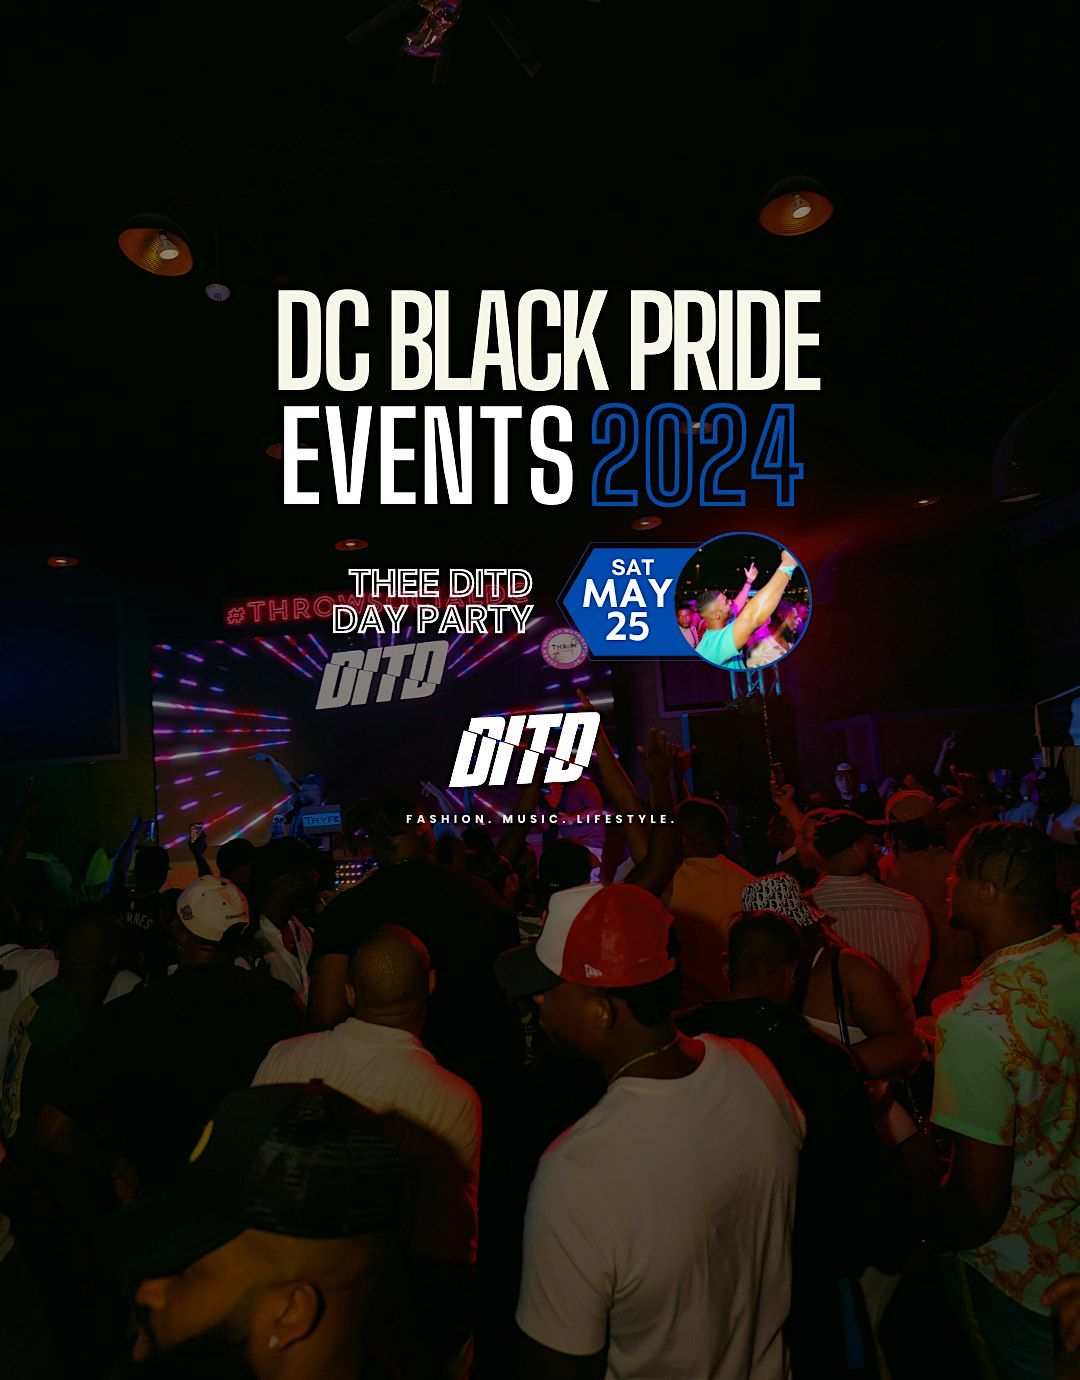 SAT 5\/25 DITD DC BLACK PRIDE THEE ULTIMATE DAY PARTY  @ THROW SOCIAL